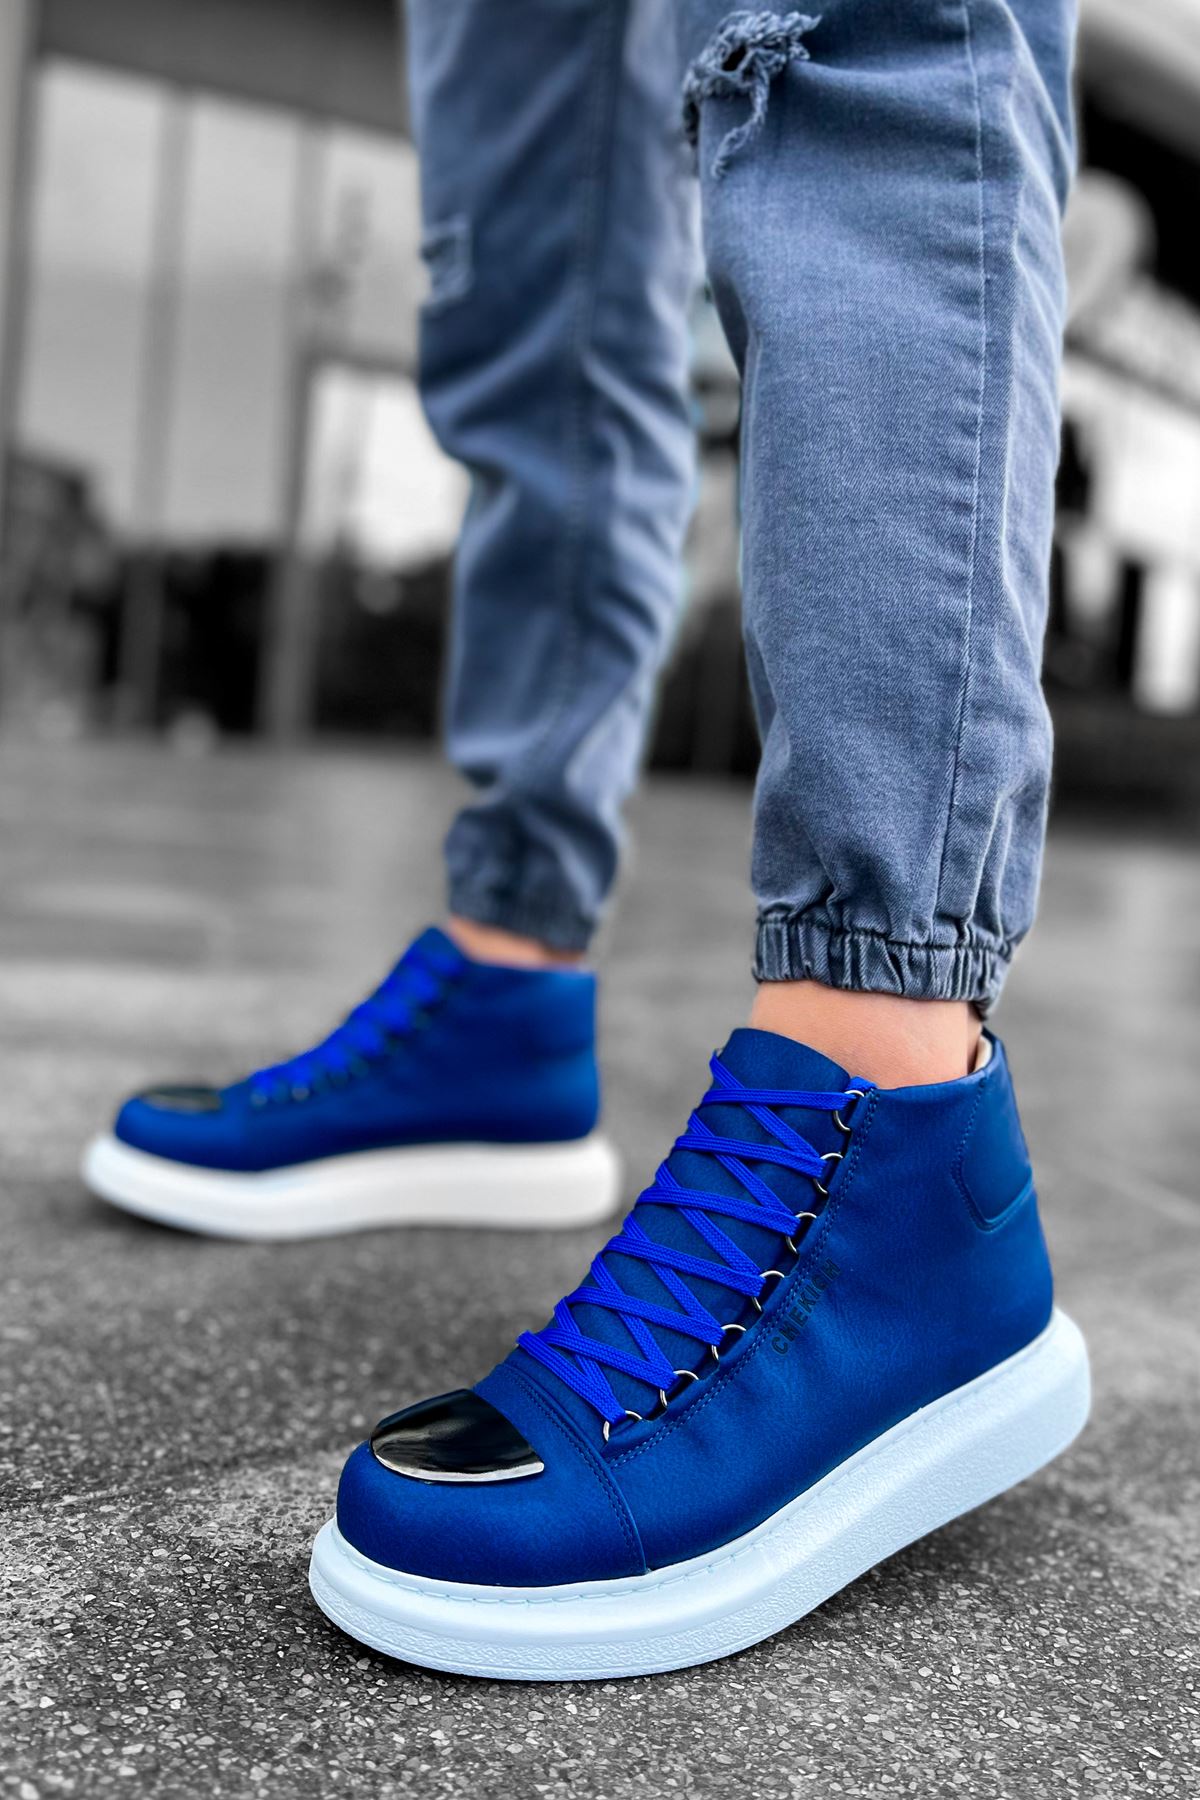 CH267 Men's shoes sneakers Boots BLUE - STREETMODE ™